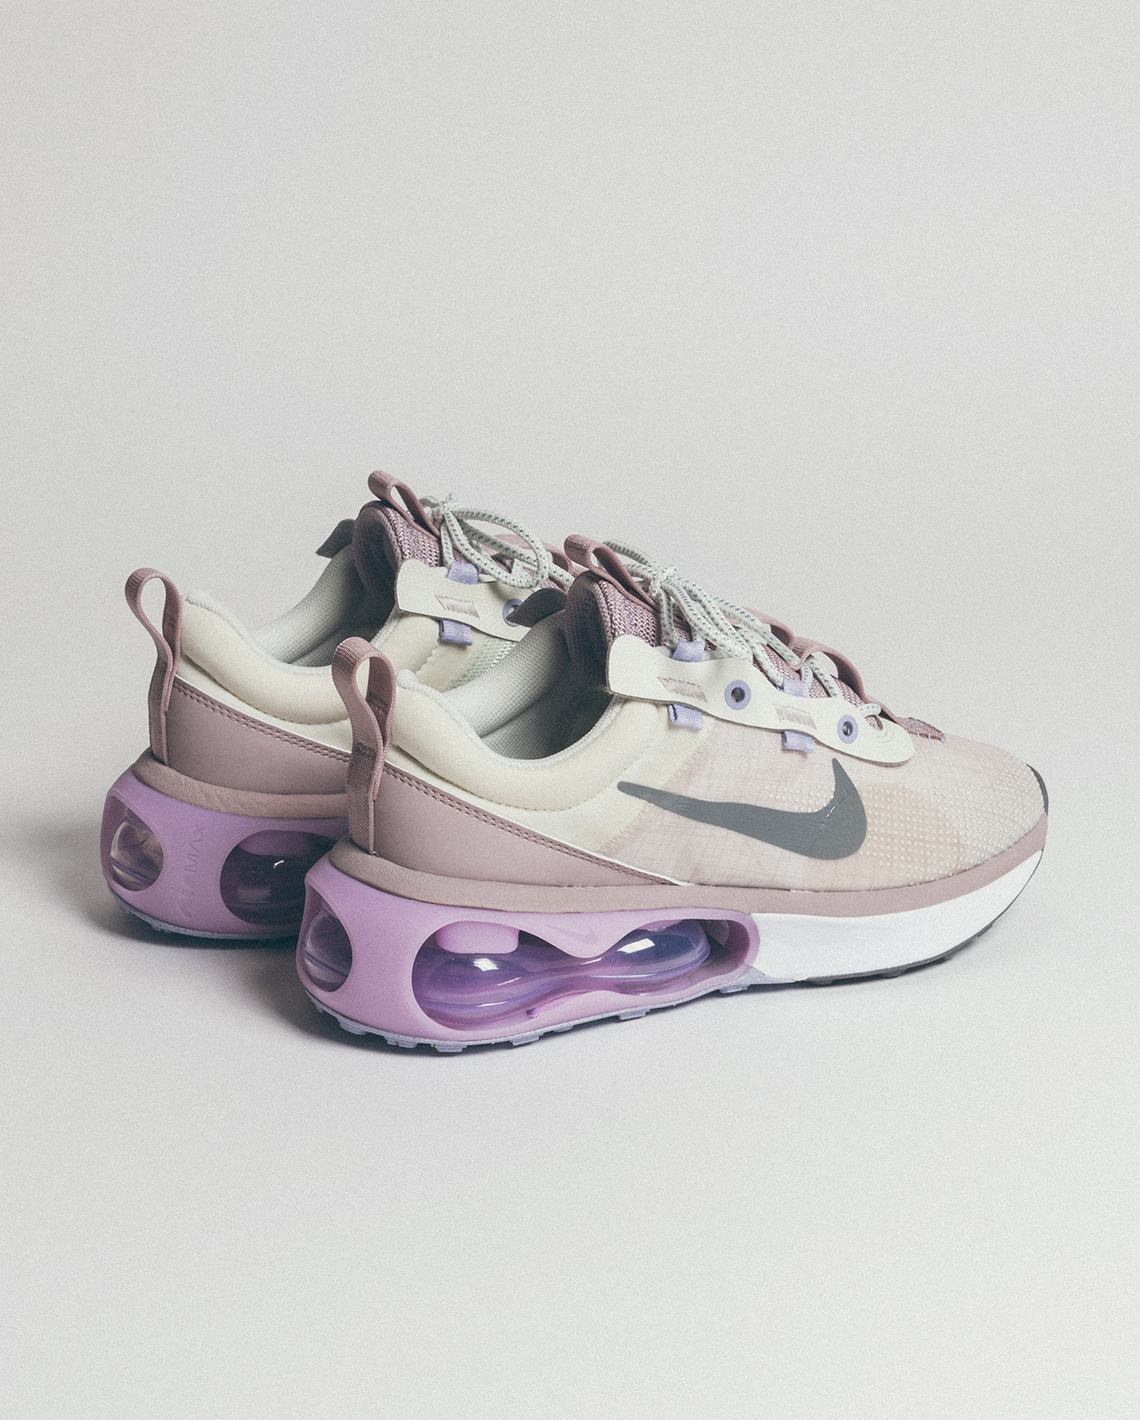 Nike Air Max Day 2022 Shopping Guide 2021 Gallery 1